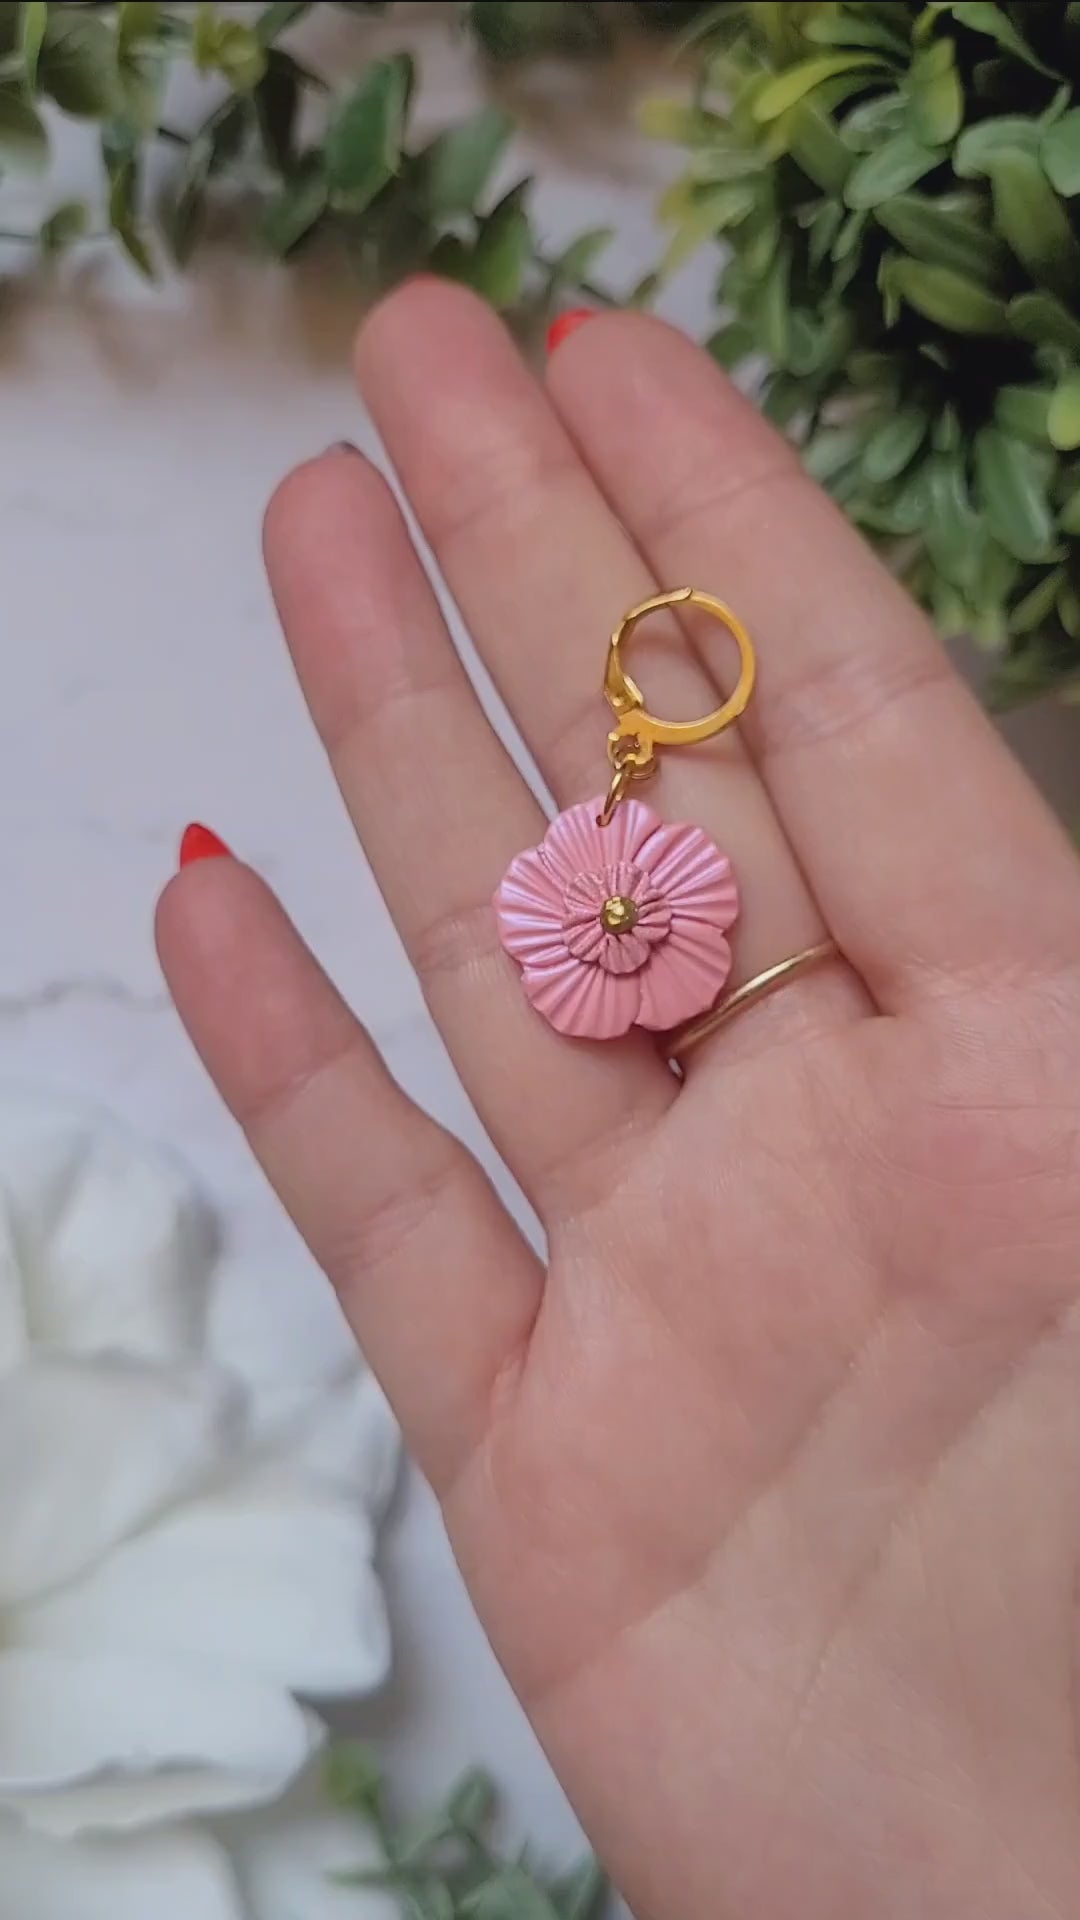 video close up of Baby pink flower earrings on white background with foliage. 